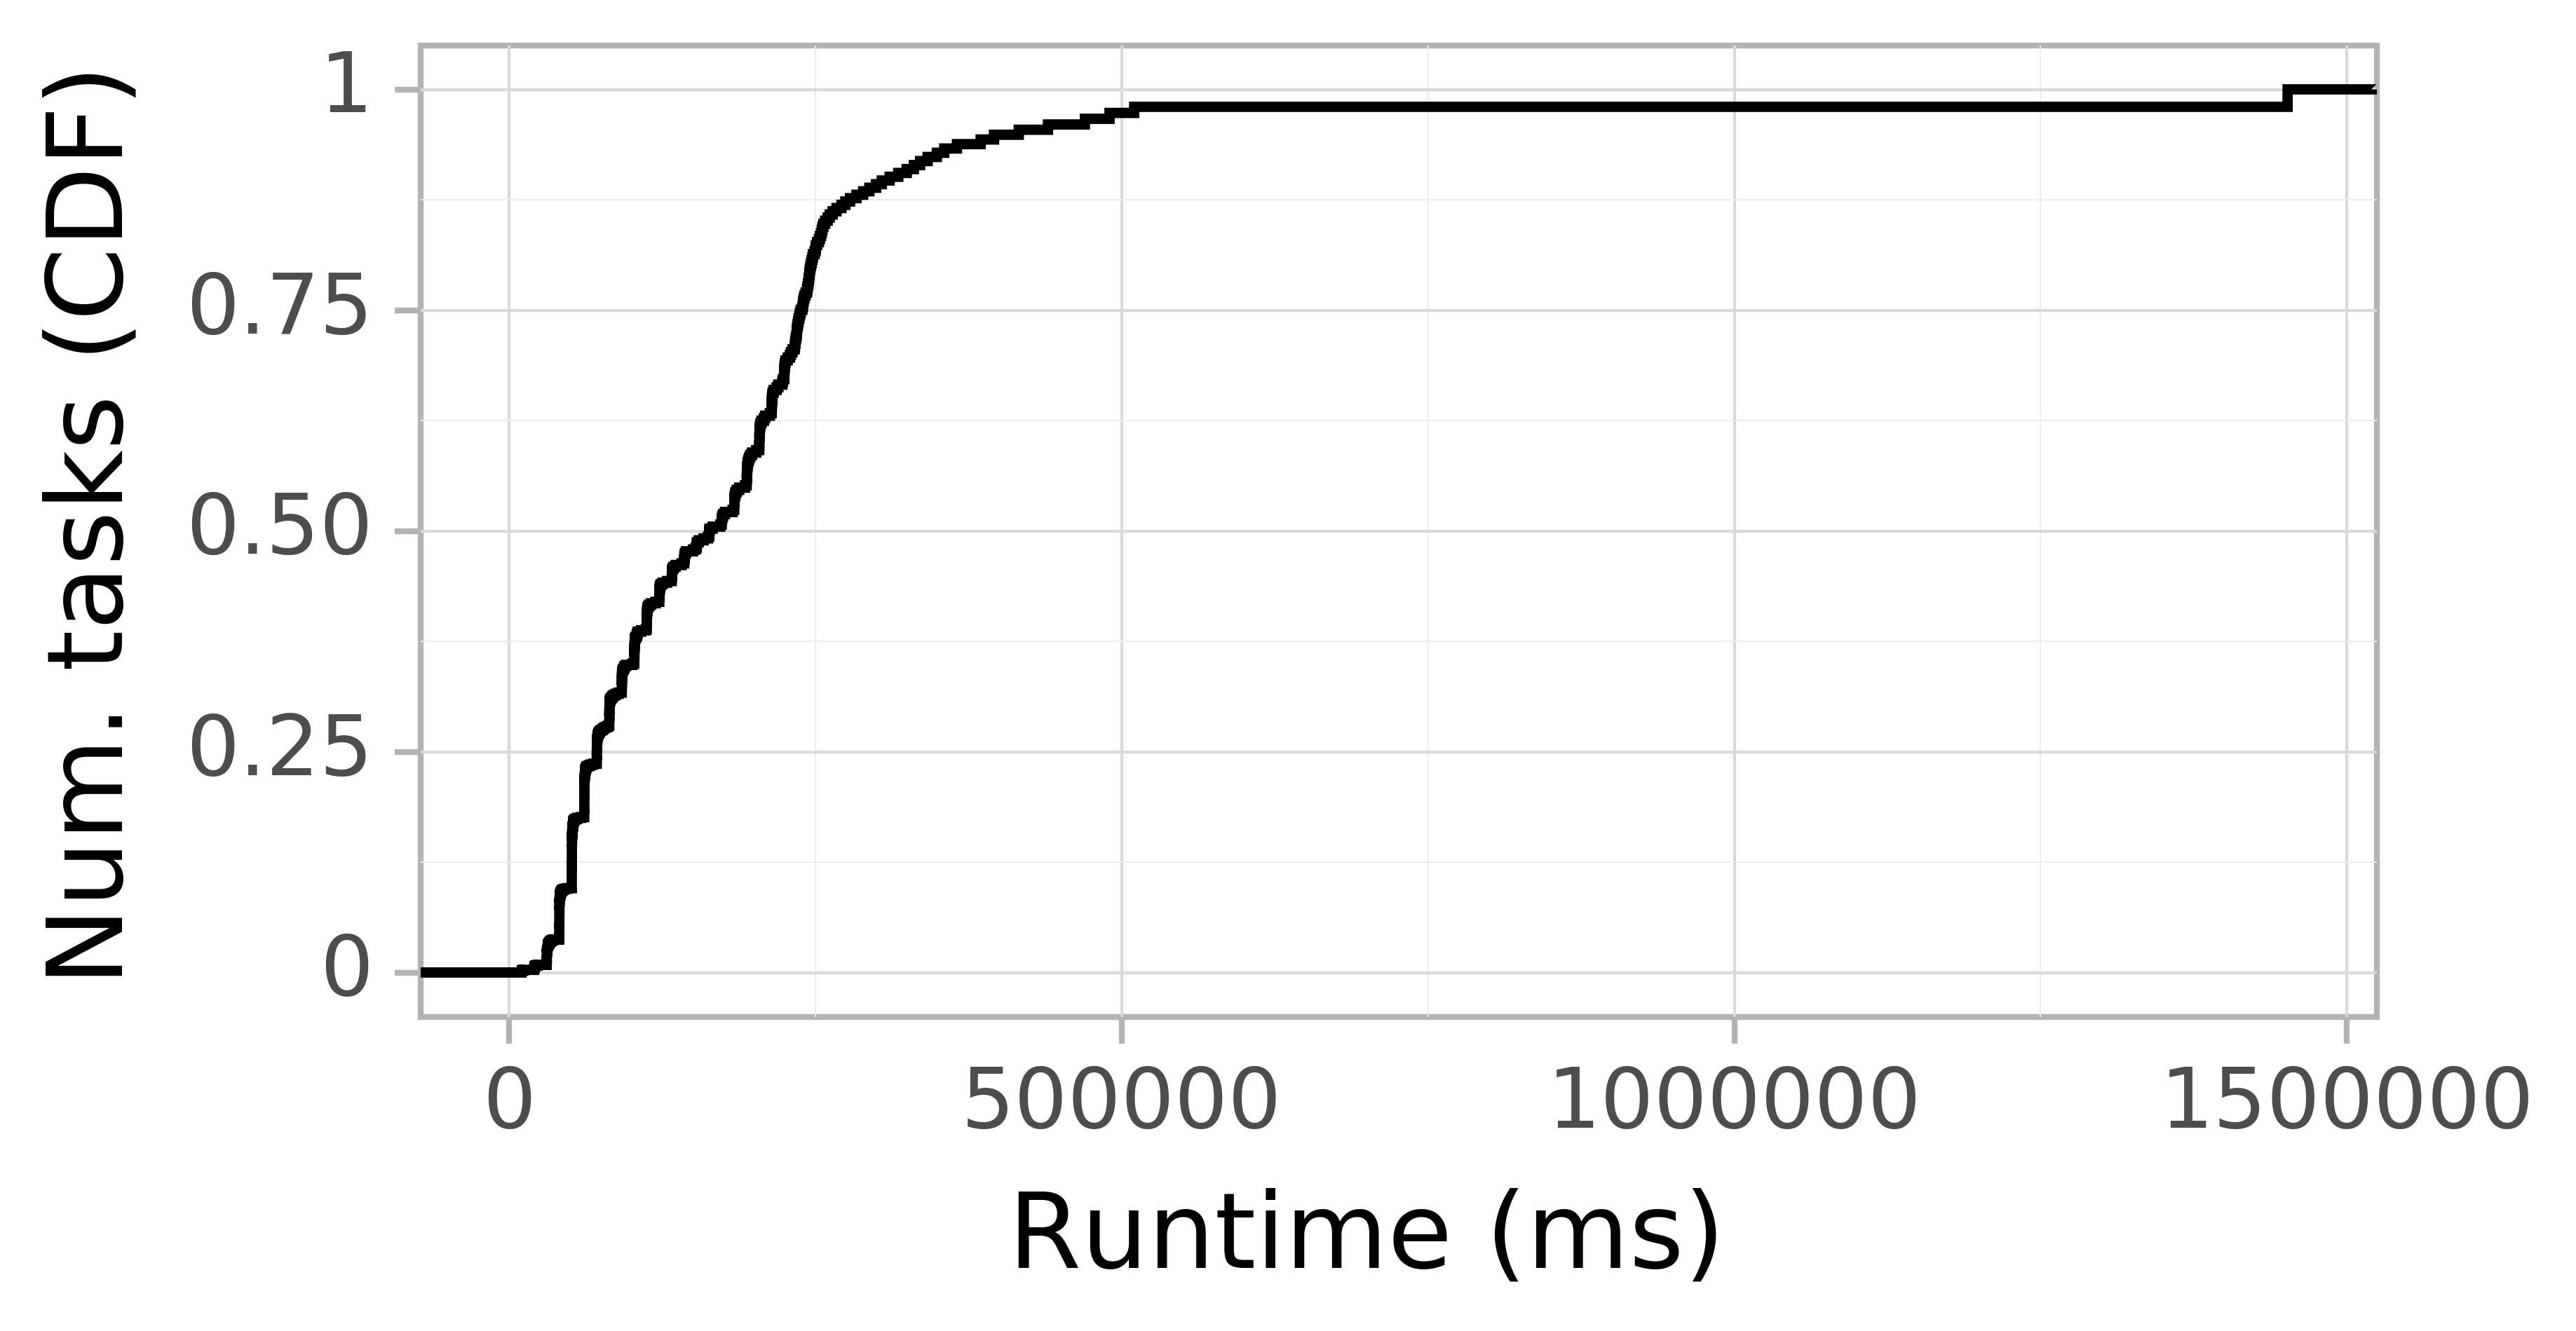 Task runtime CDF graph for the askalon_ee2 trace.